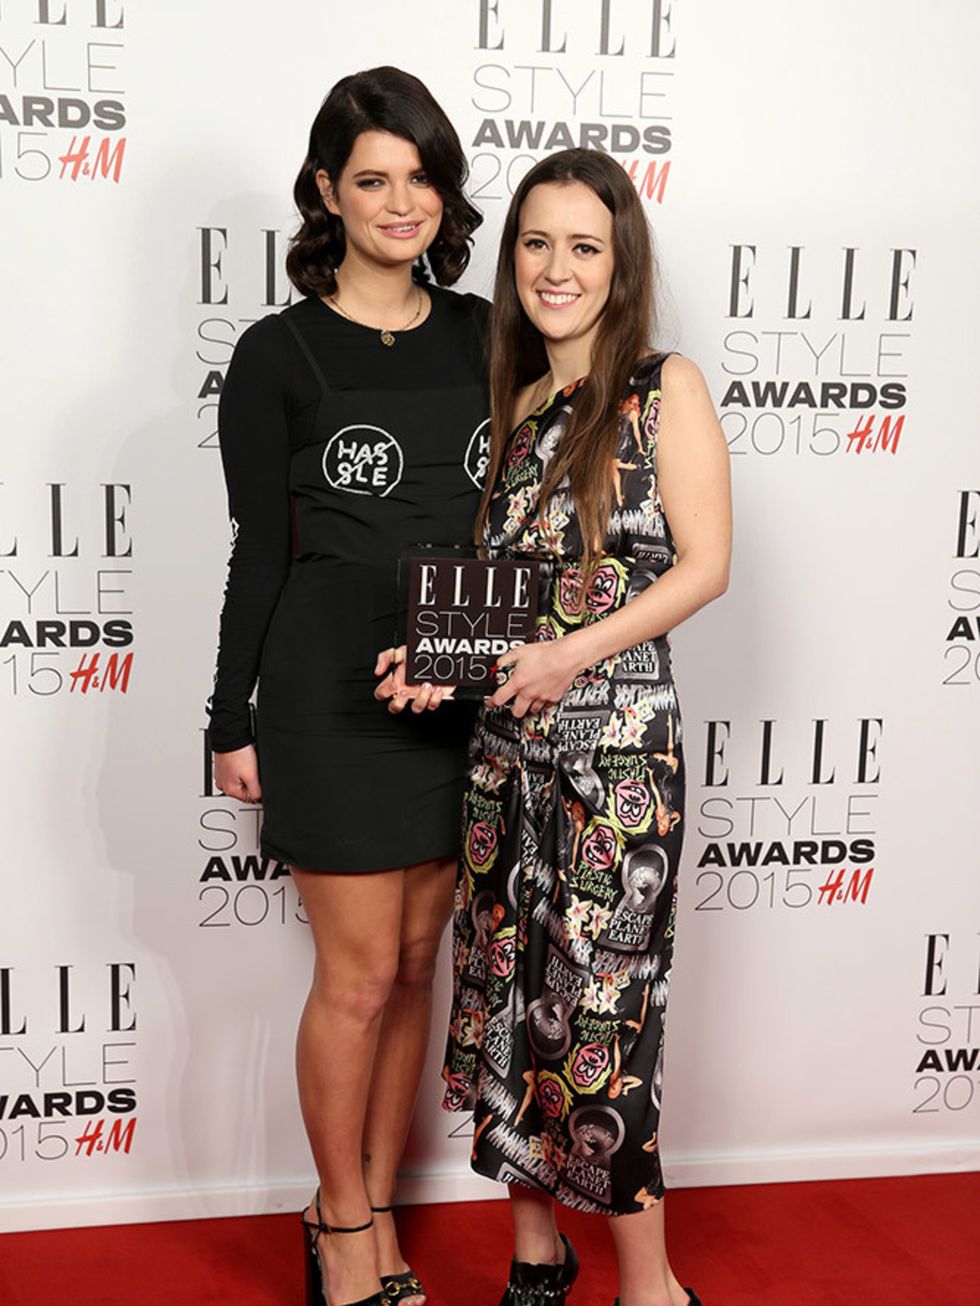 <p><a href="http://www.elleuk.com/tags/pixie-geldof">Pixie Geldof</a> presents the award for the Best Emerging Designer to <a href="http://www.elleuk.com/tags/ashley-williams">Ashley Williams</a> at the ELLE Style Awards 2015.</p>